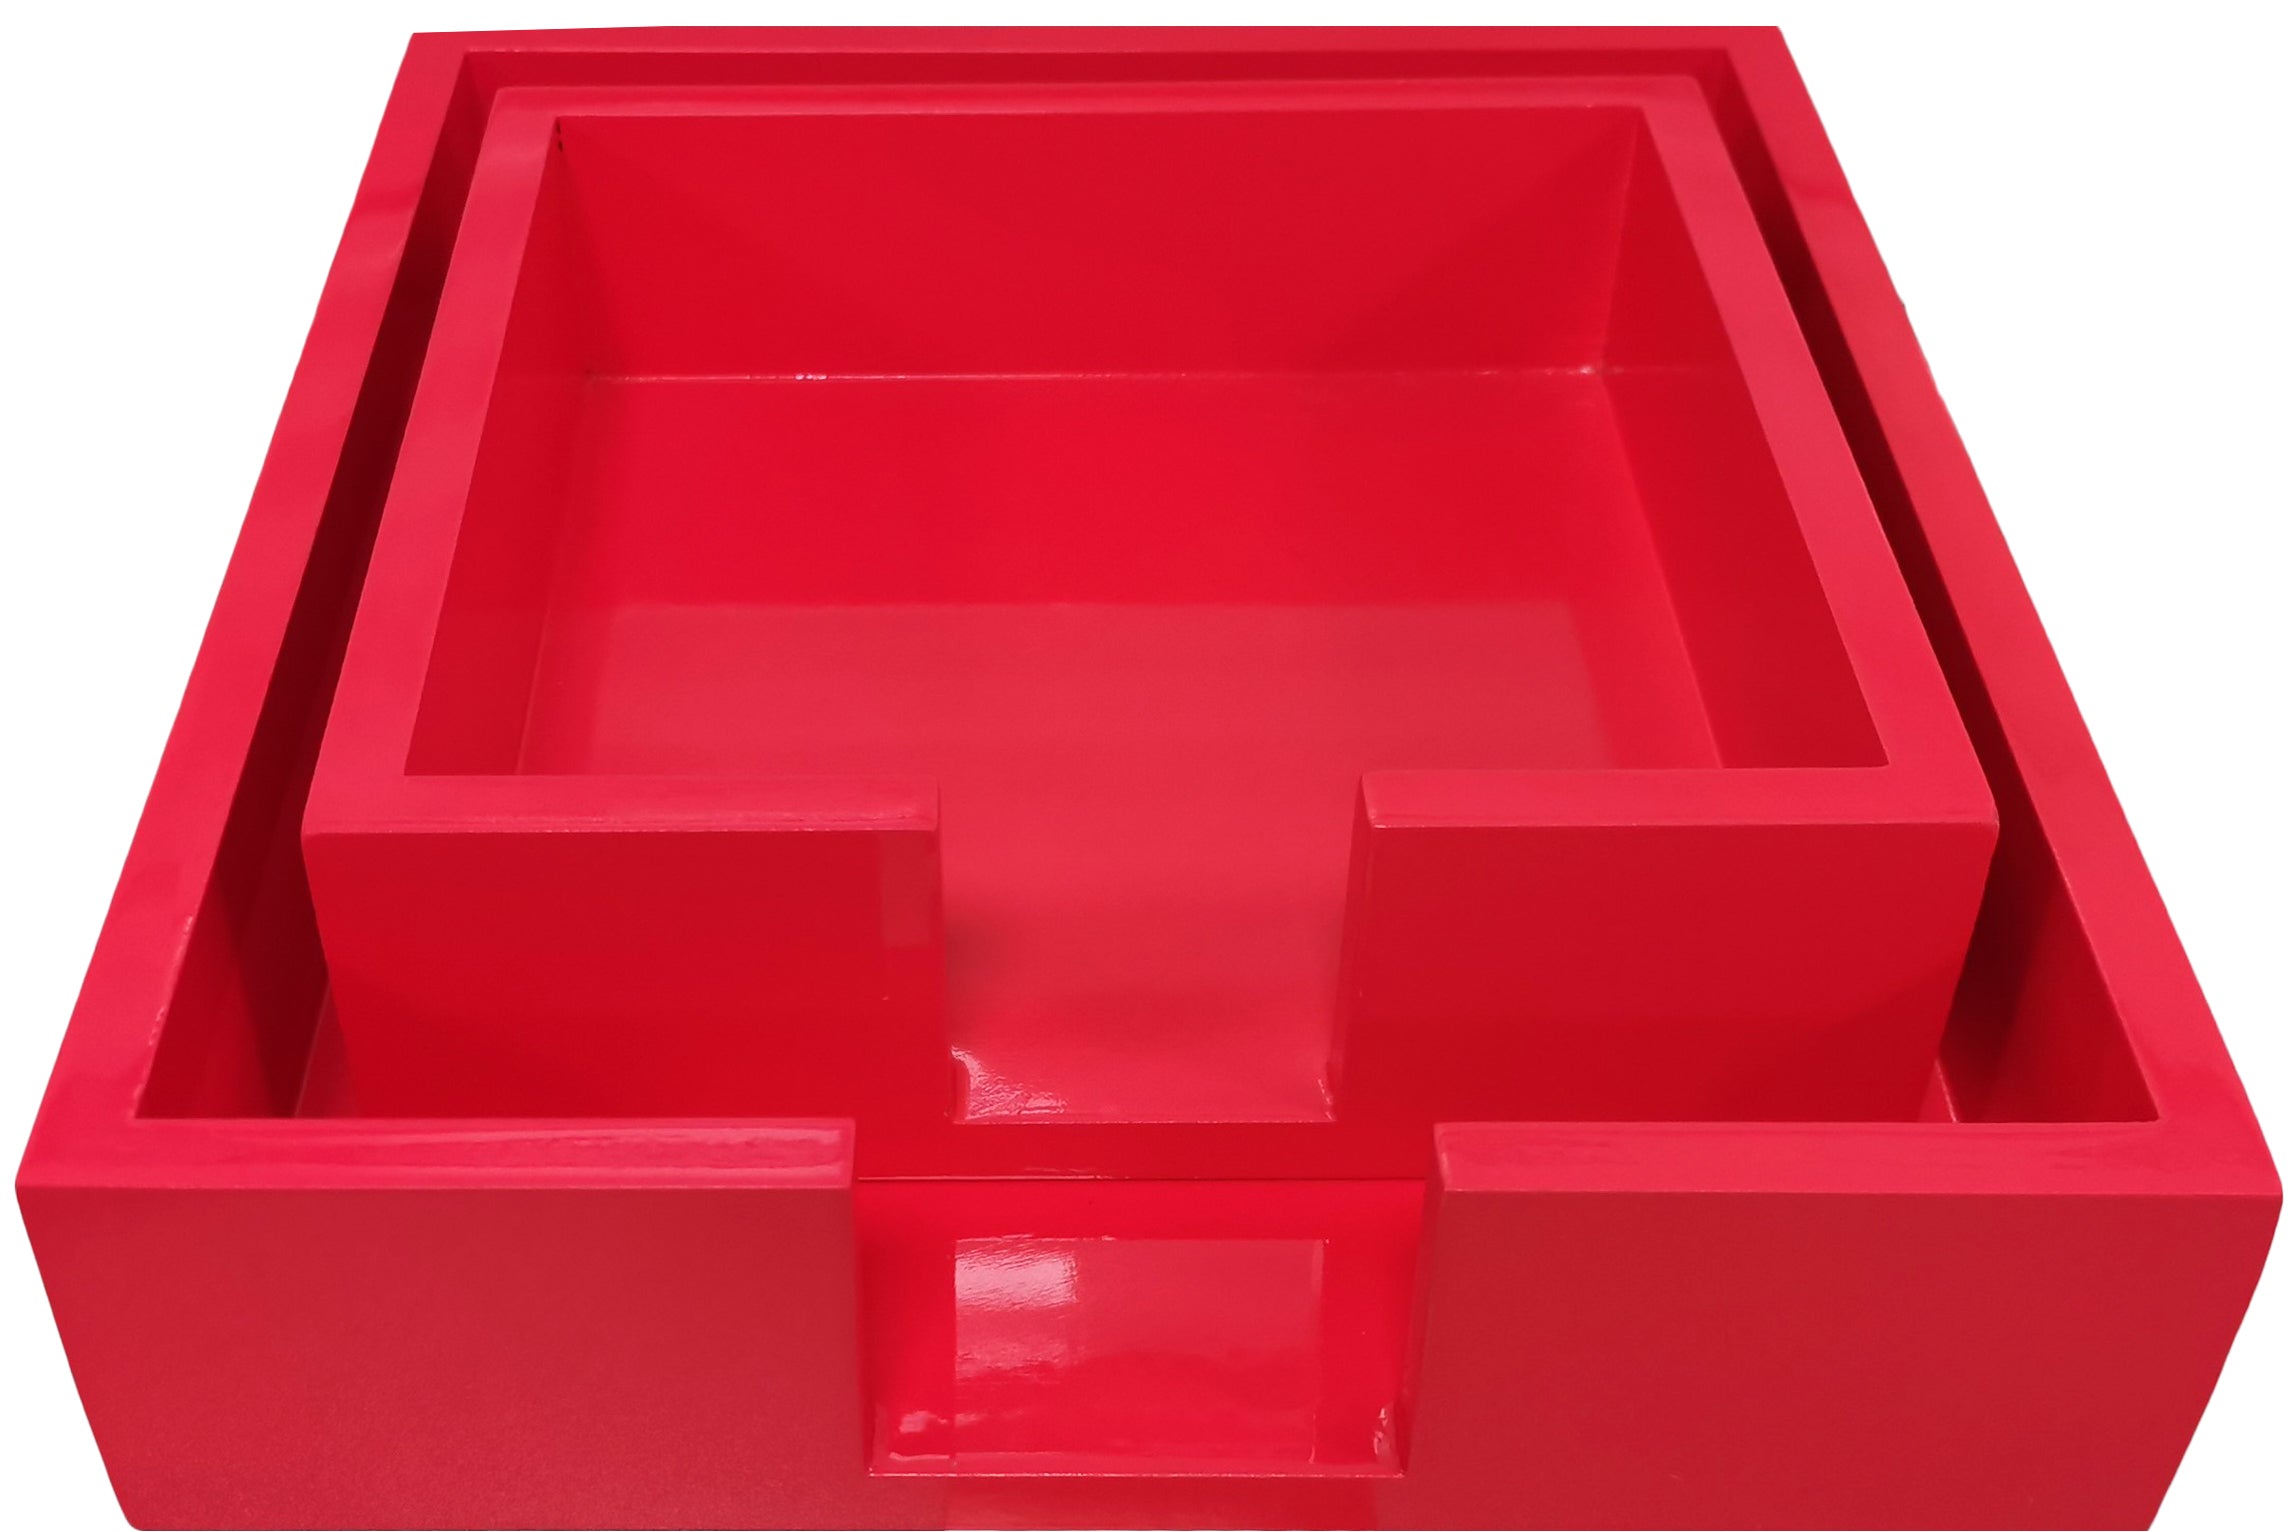 Small Lacquer Tray - The Brights